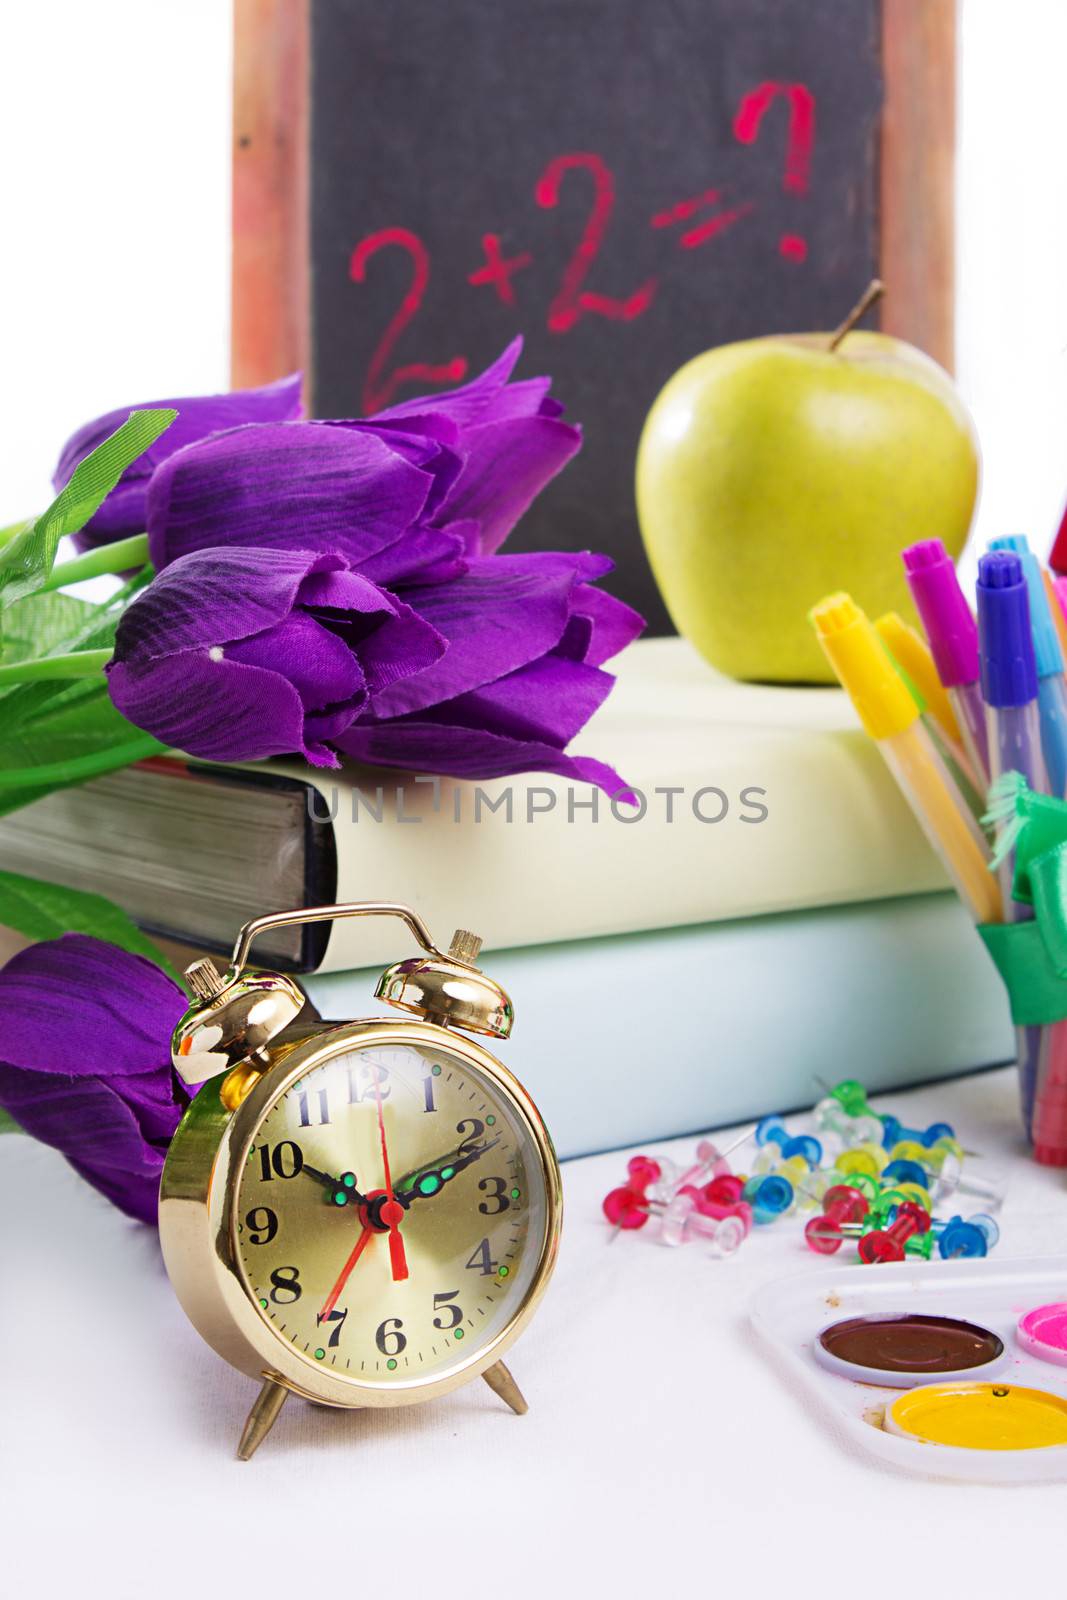 Clock, flowers and apple, back to school concept by Angel_a